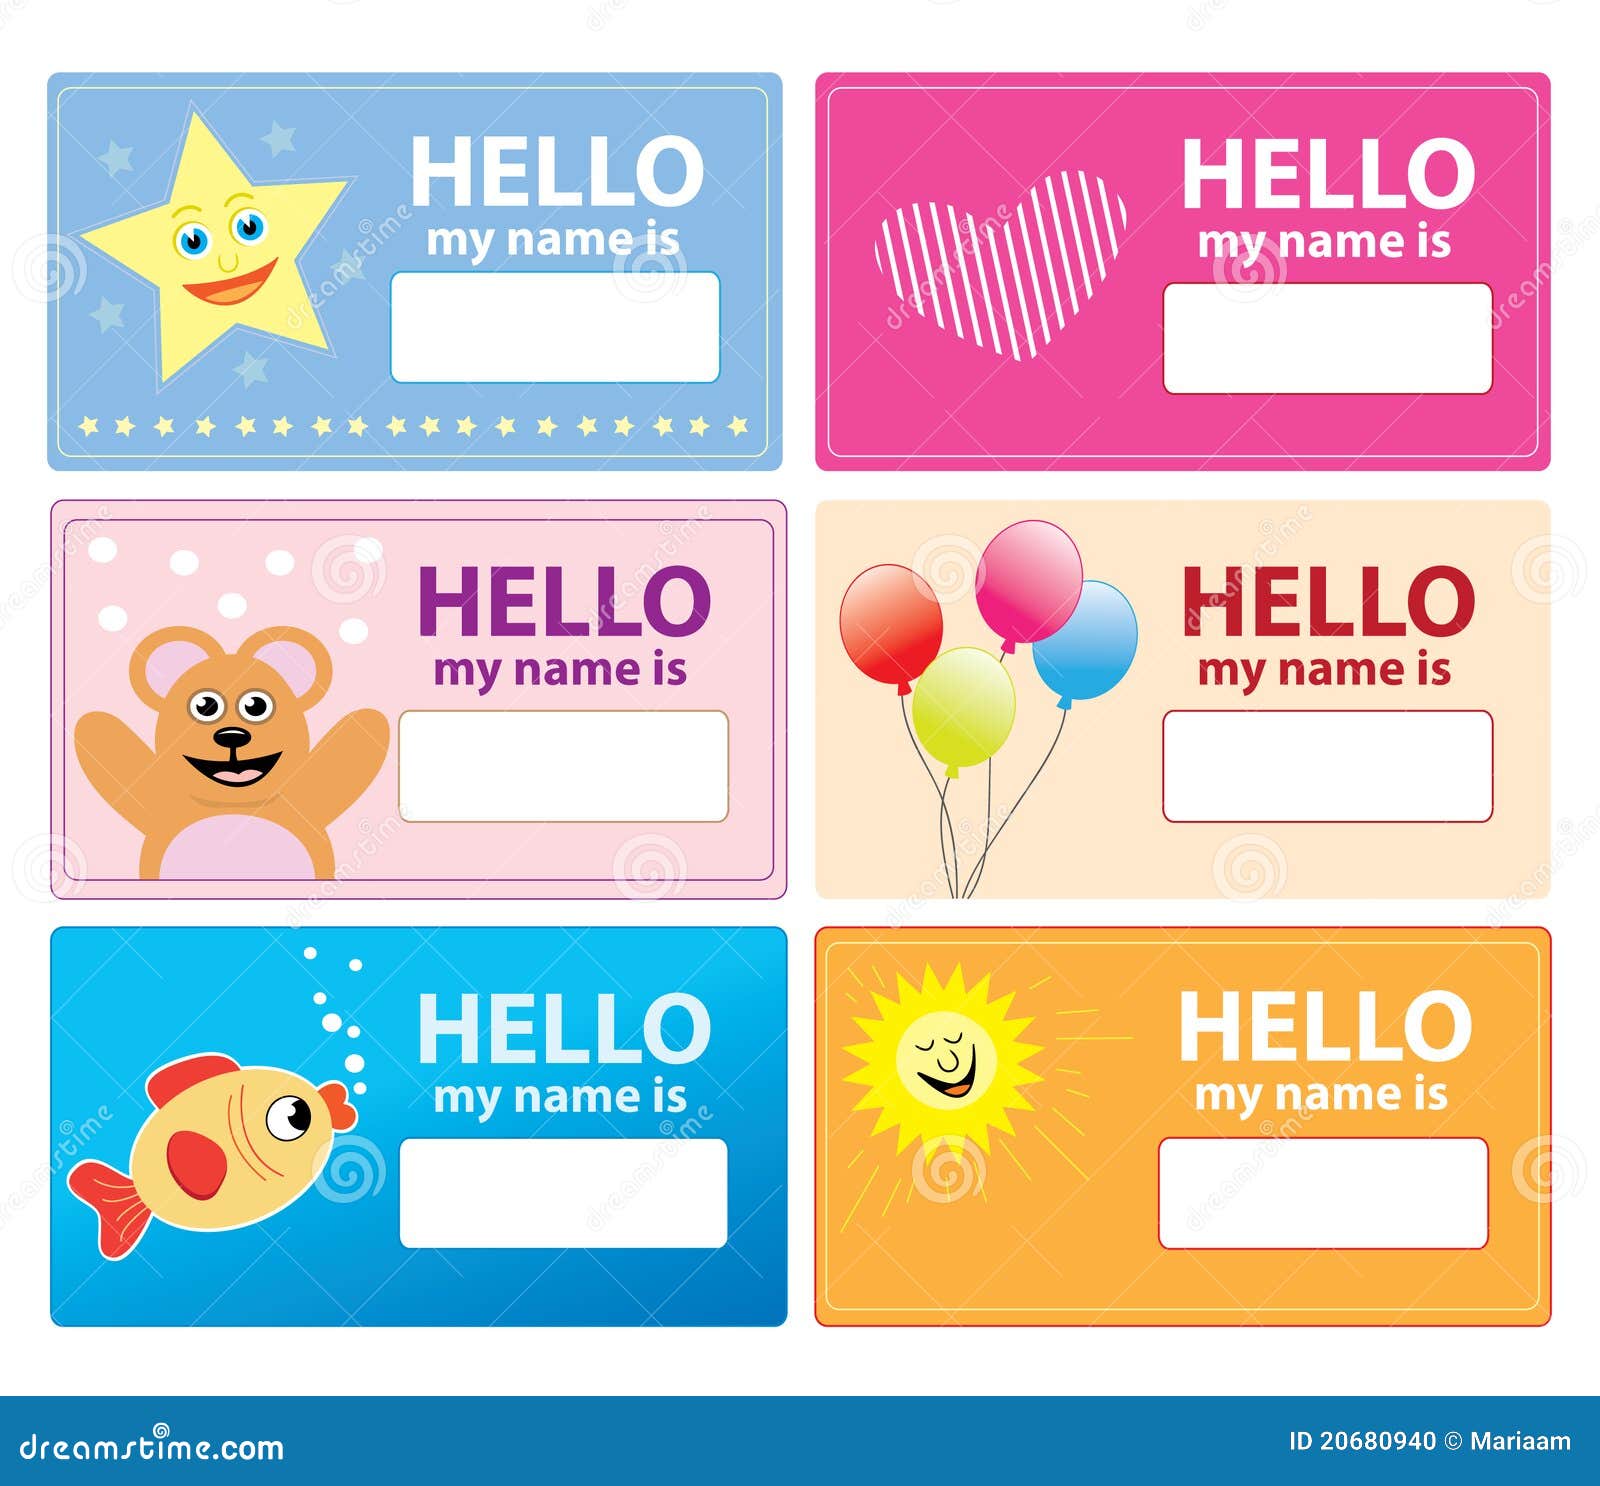 Children Name Cards Stock Photo - Image: 20680940